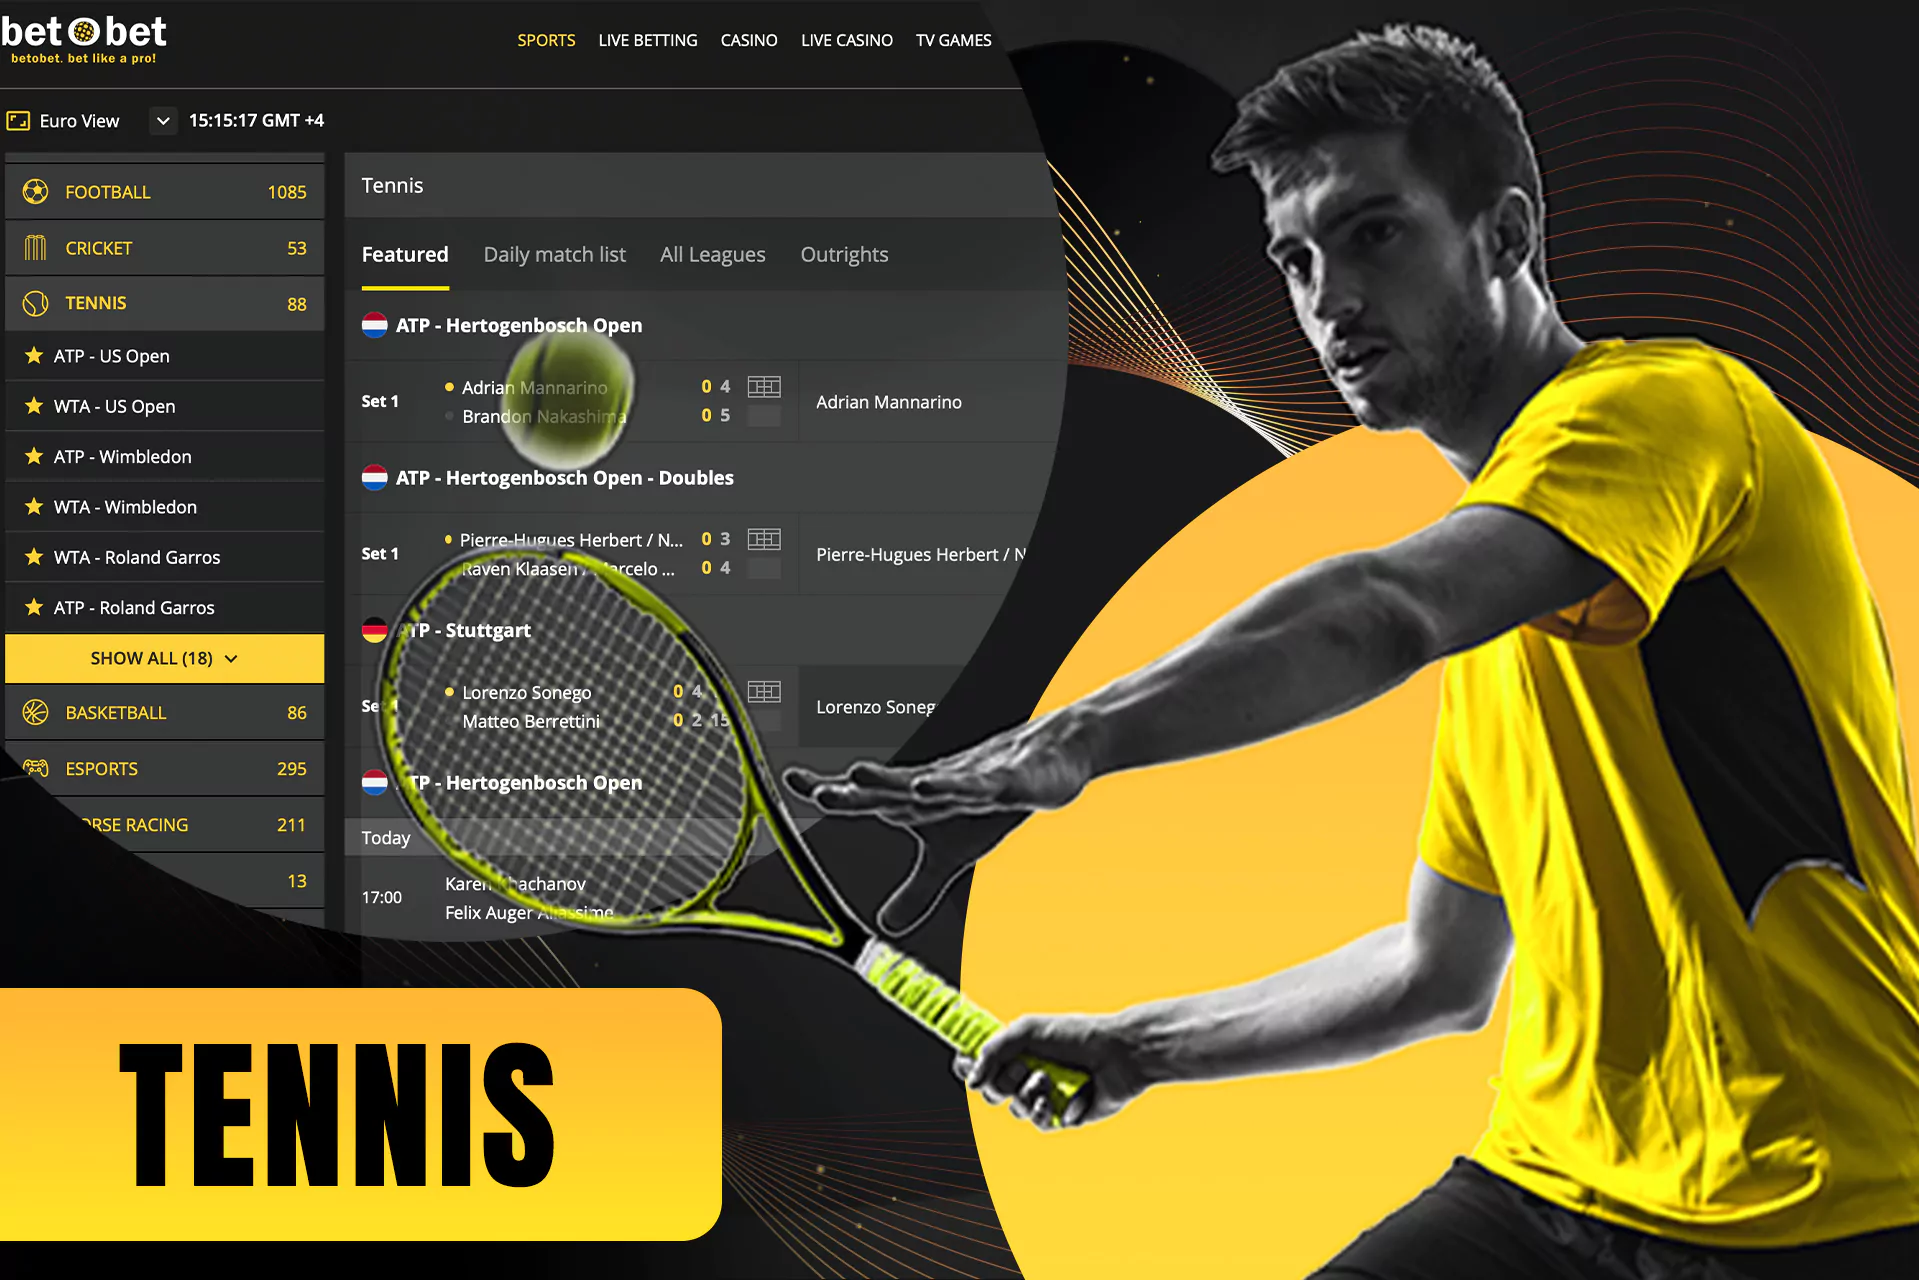 You can place bet on tennis leagues and championships.